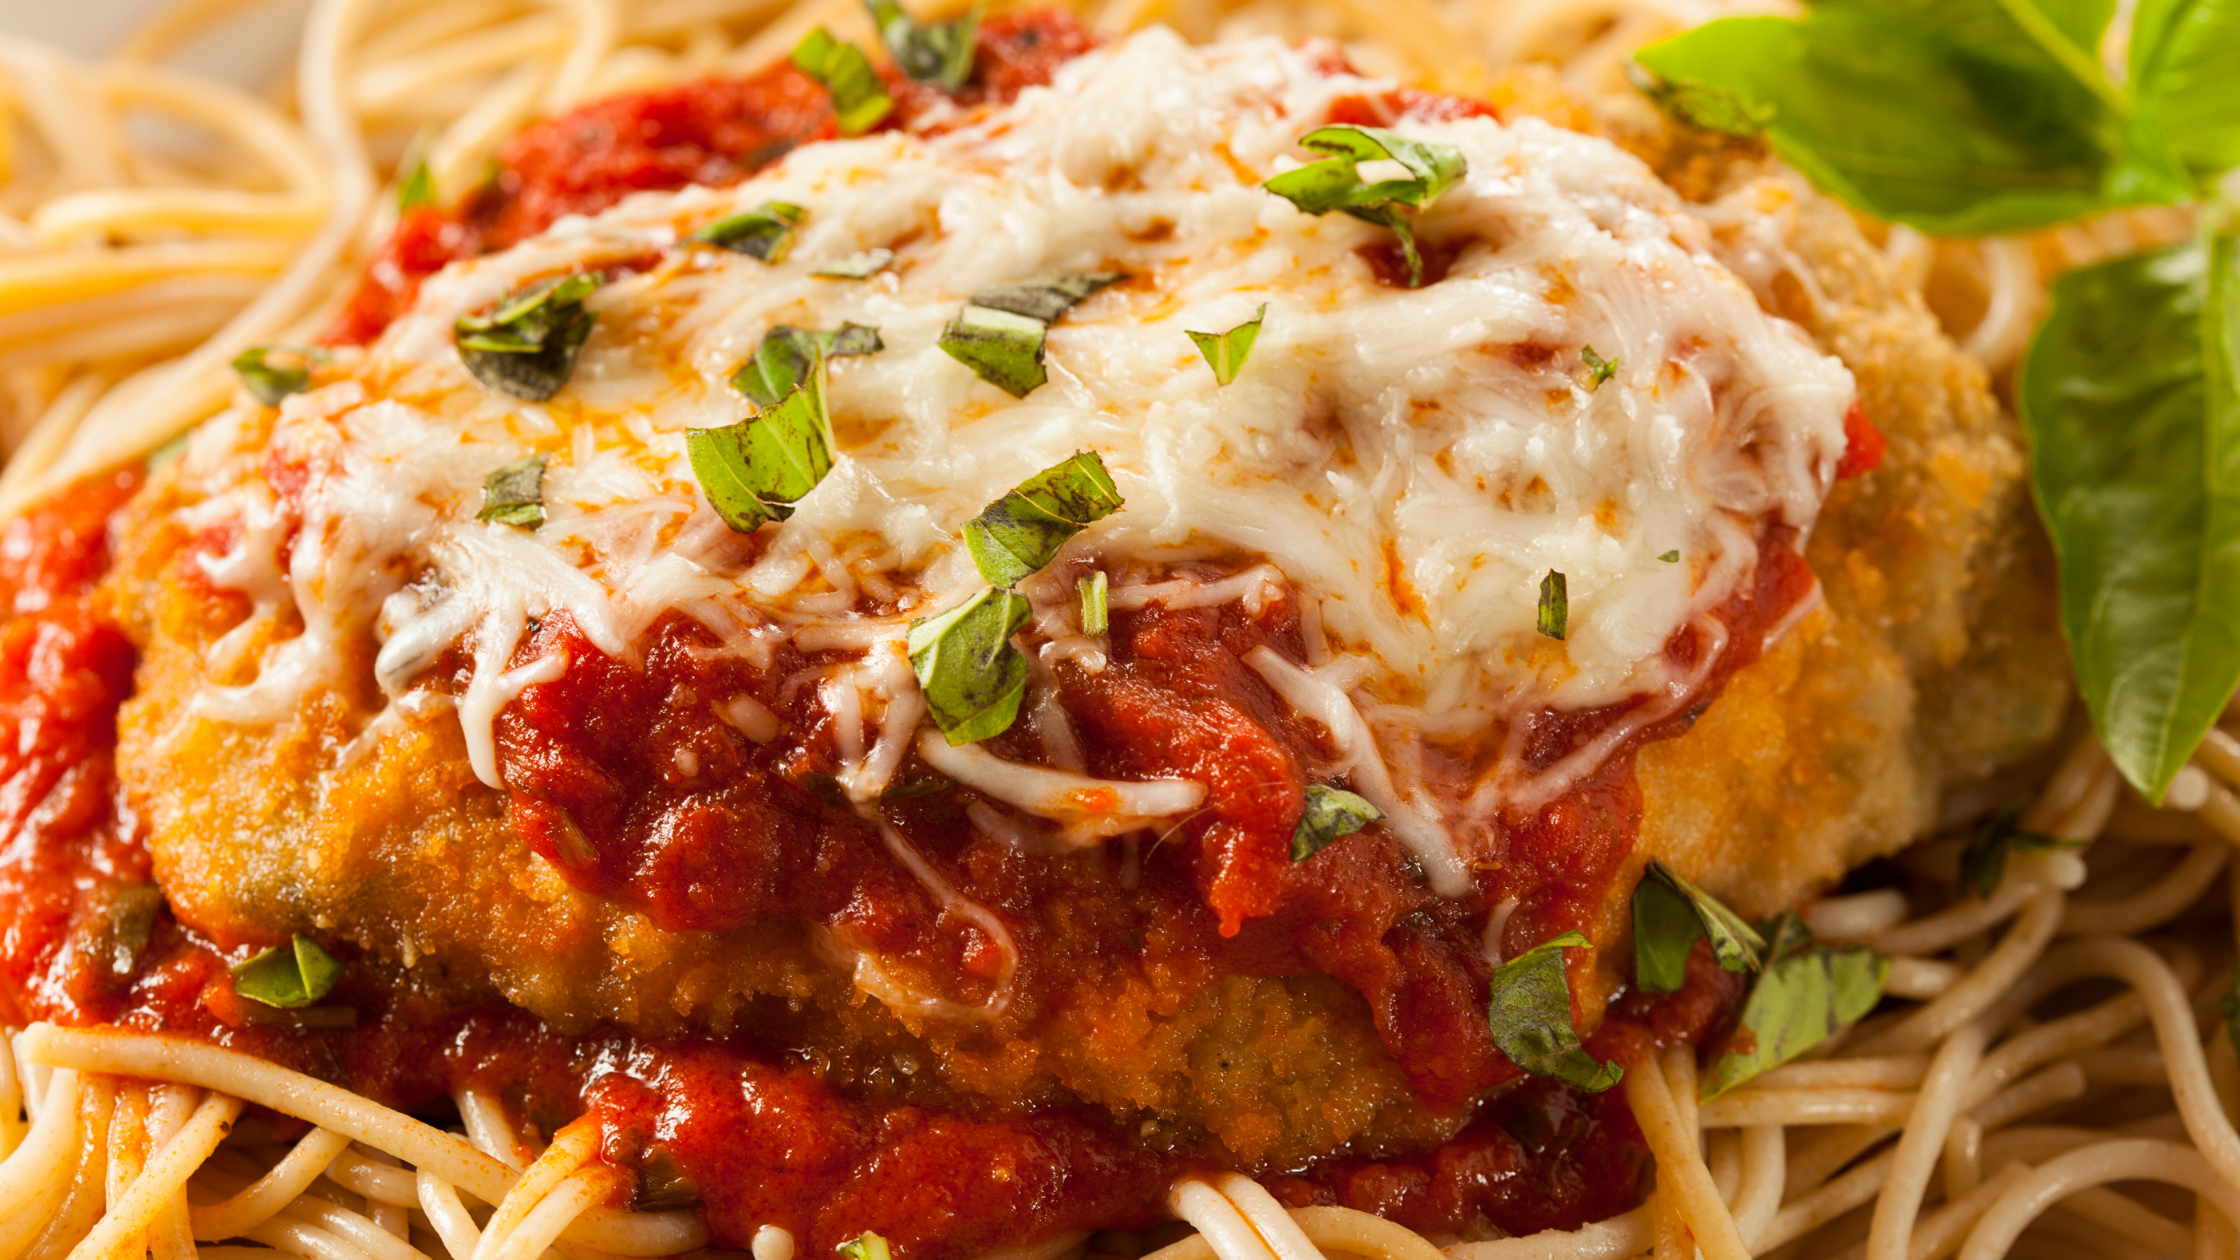 Low Calorie Chicken Parmesan with Whole Grain Spaghetti: A Healthy Recipe for Delicious Italian Food 1